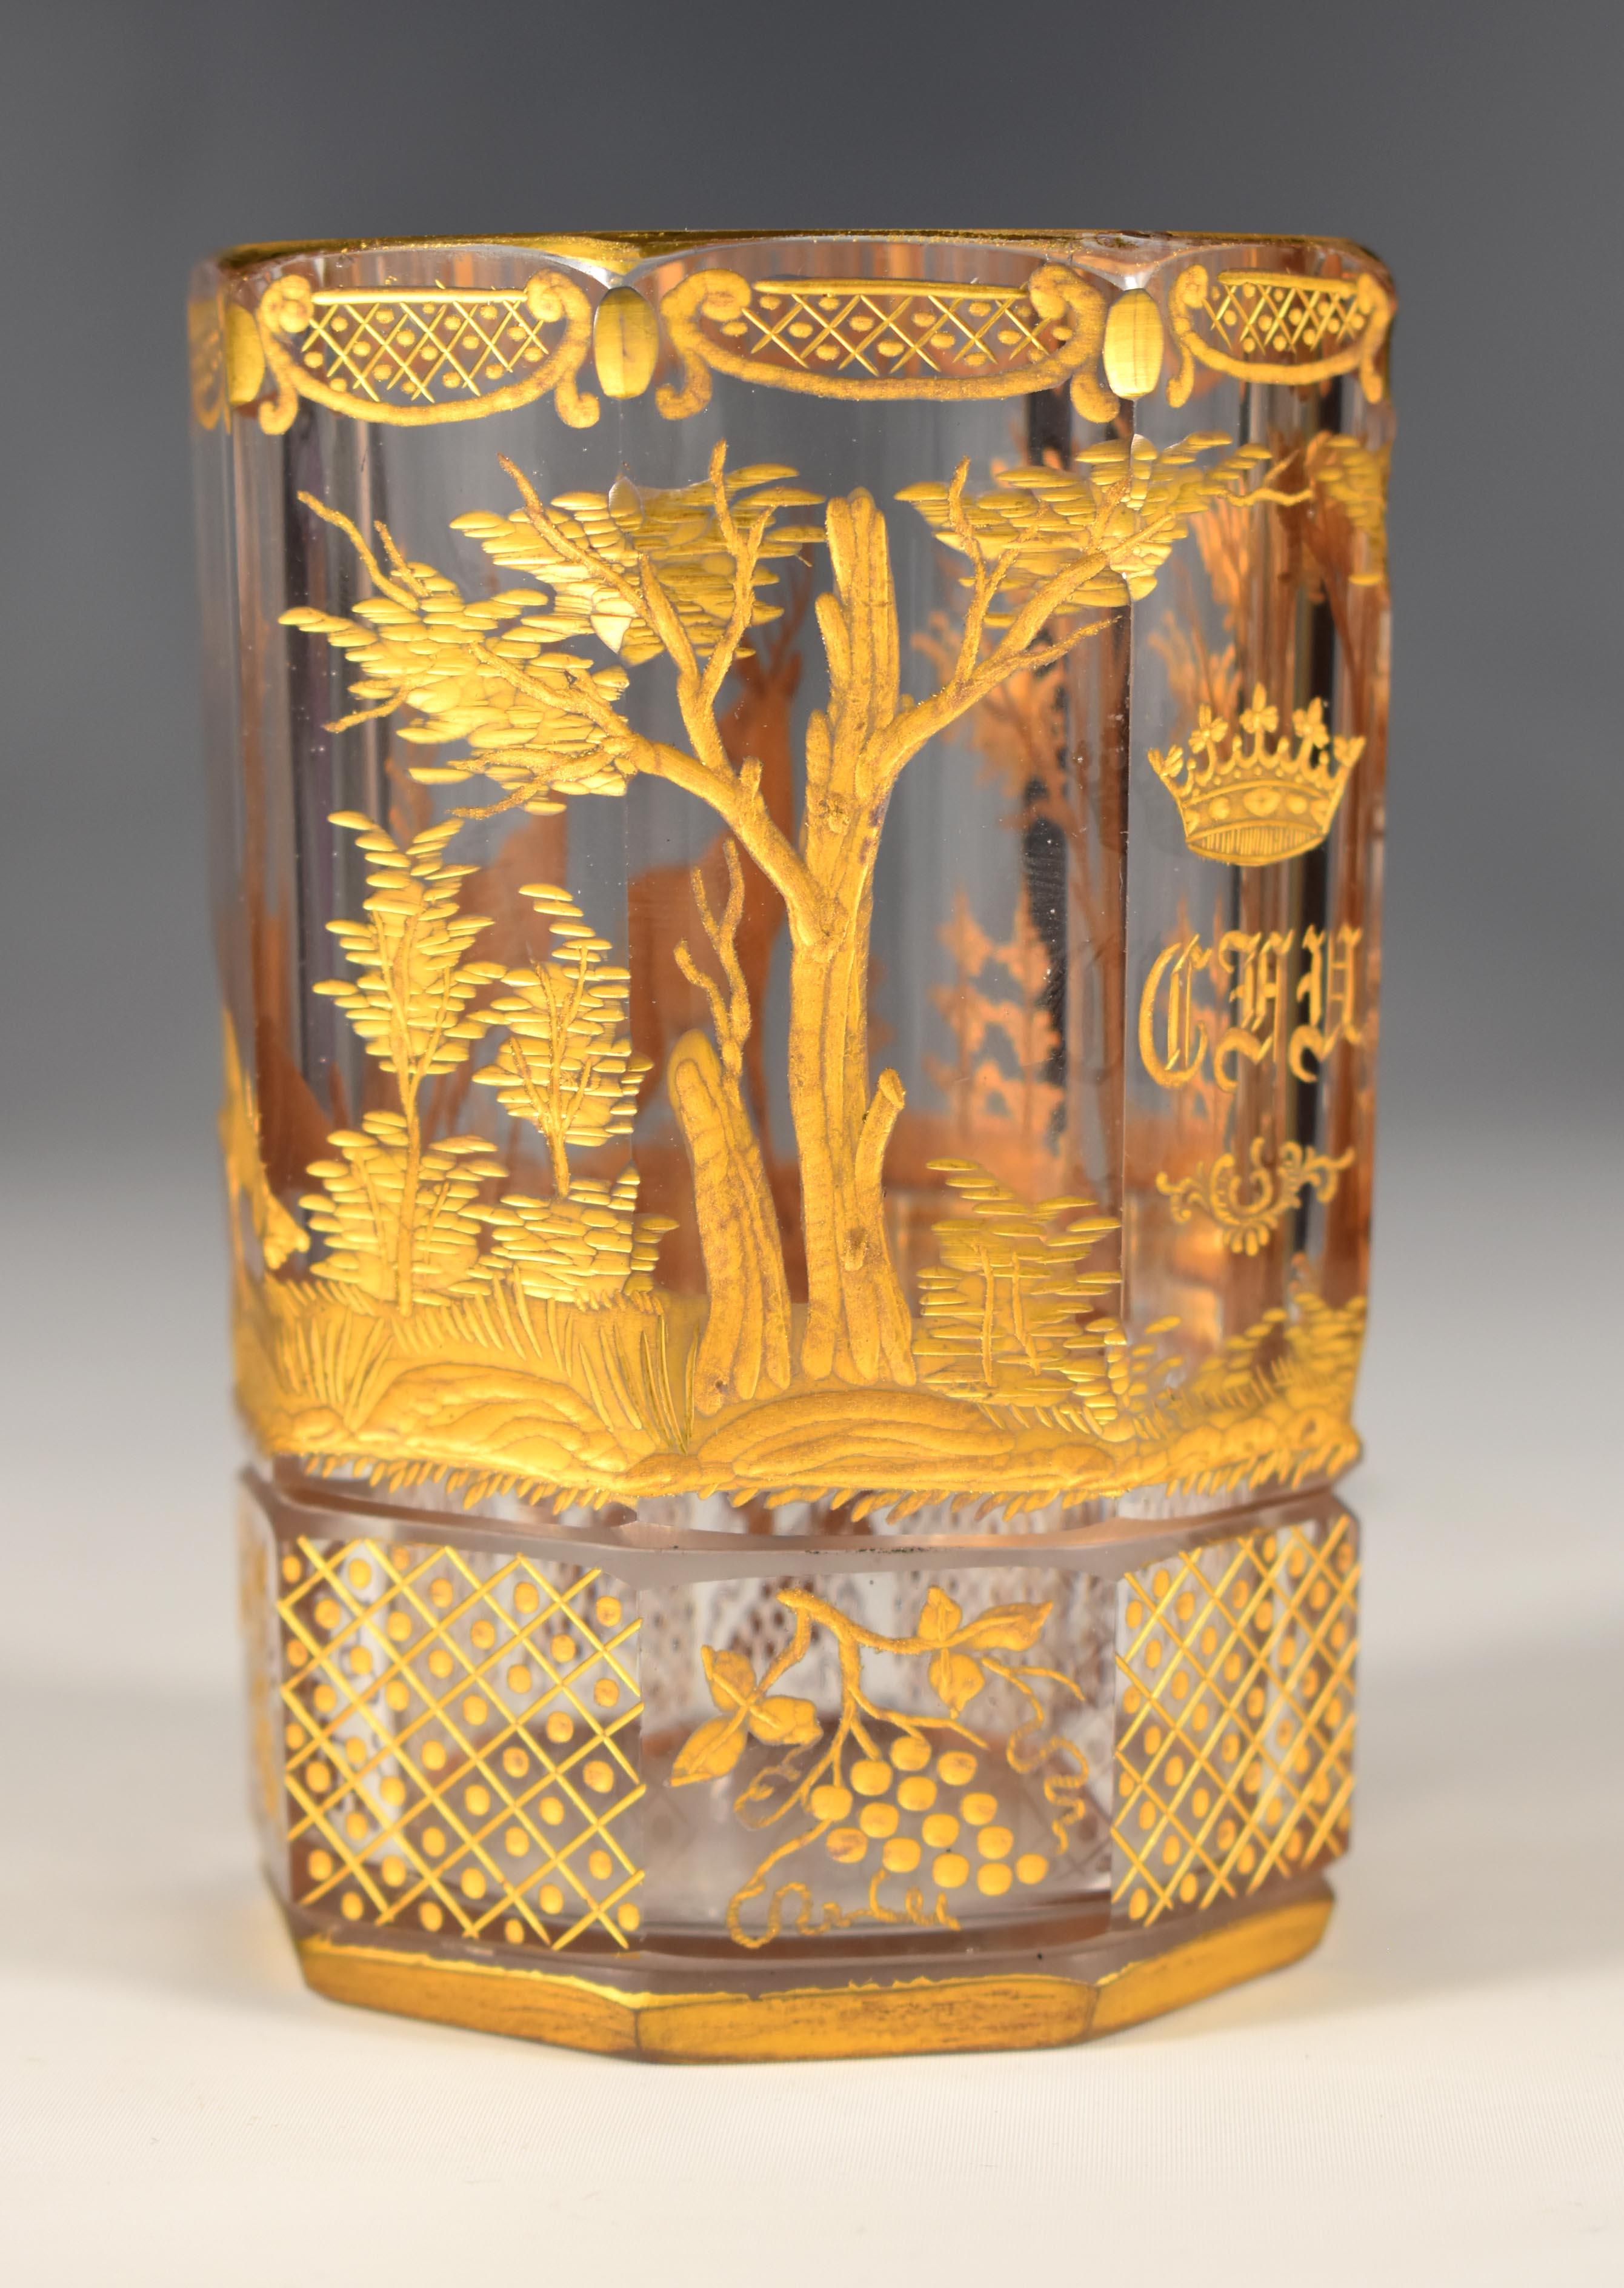 Gilded Vase + Two Gilded Glasses - Hunting motif. 20th century For Sale 8